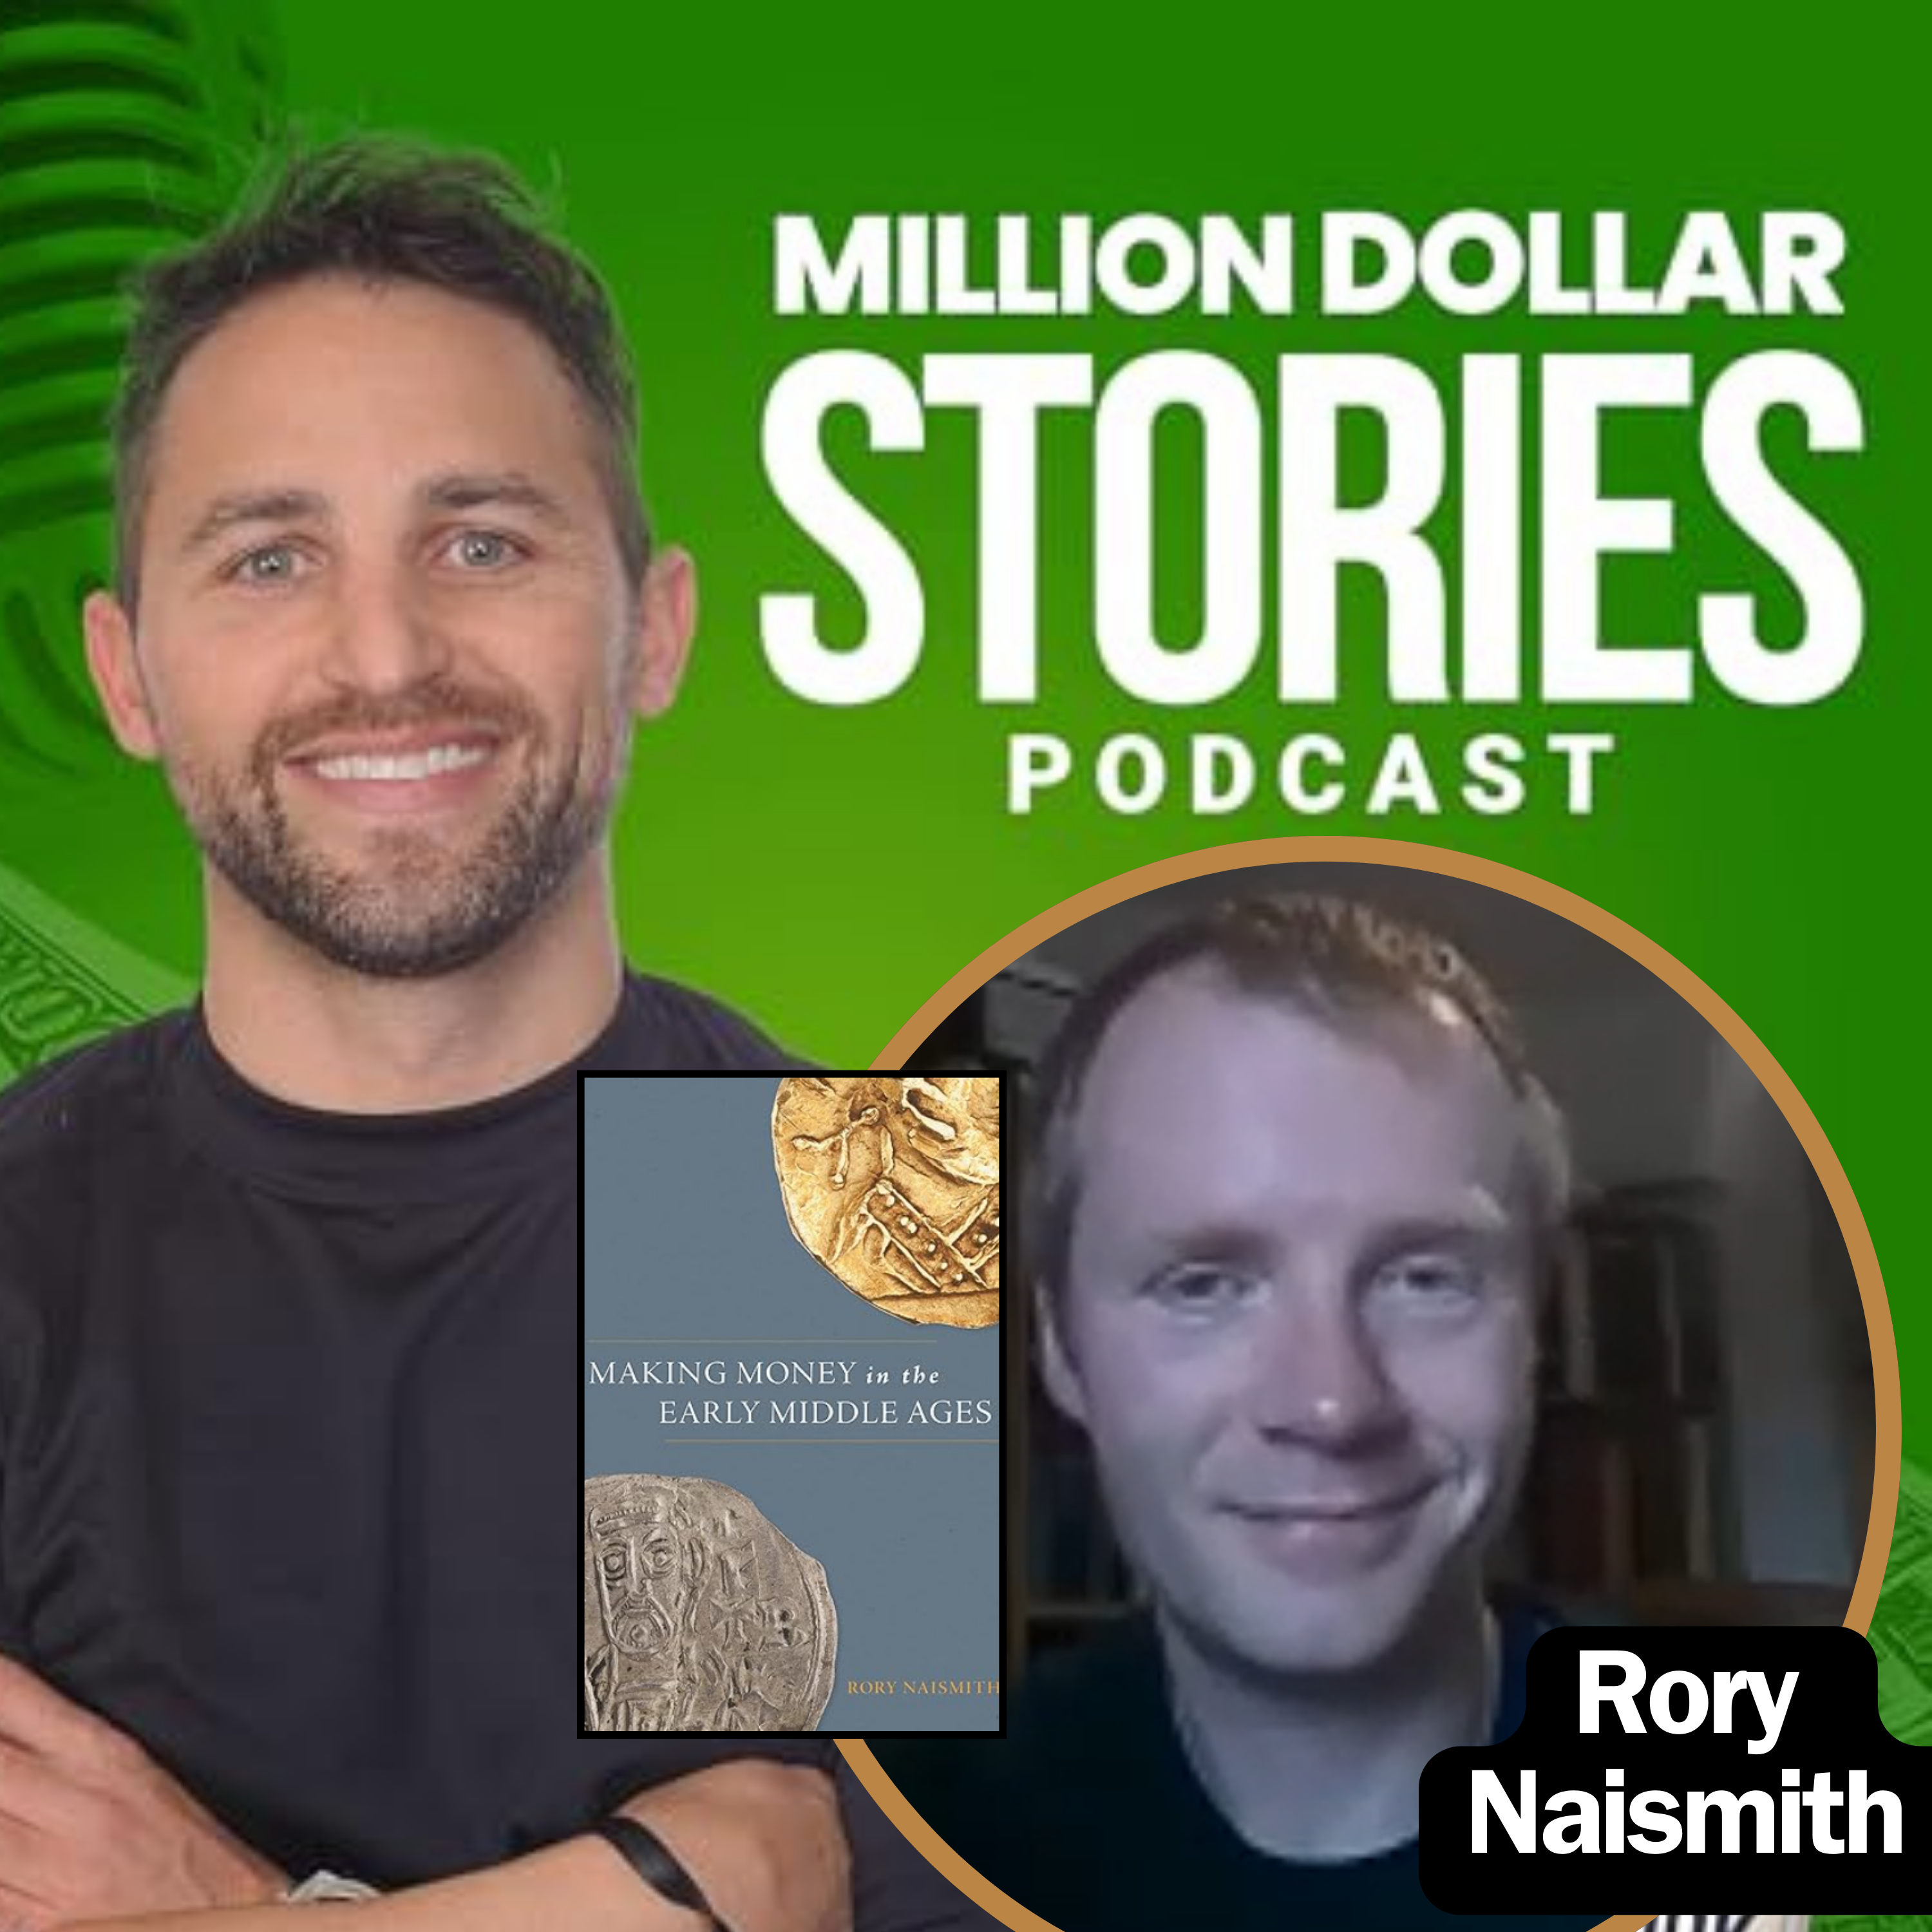 Rory Naismith – Author of “Making Money in the Early Middle Ages”